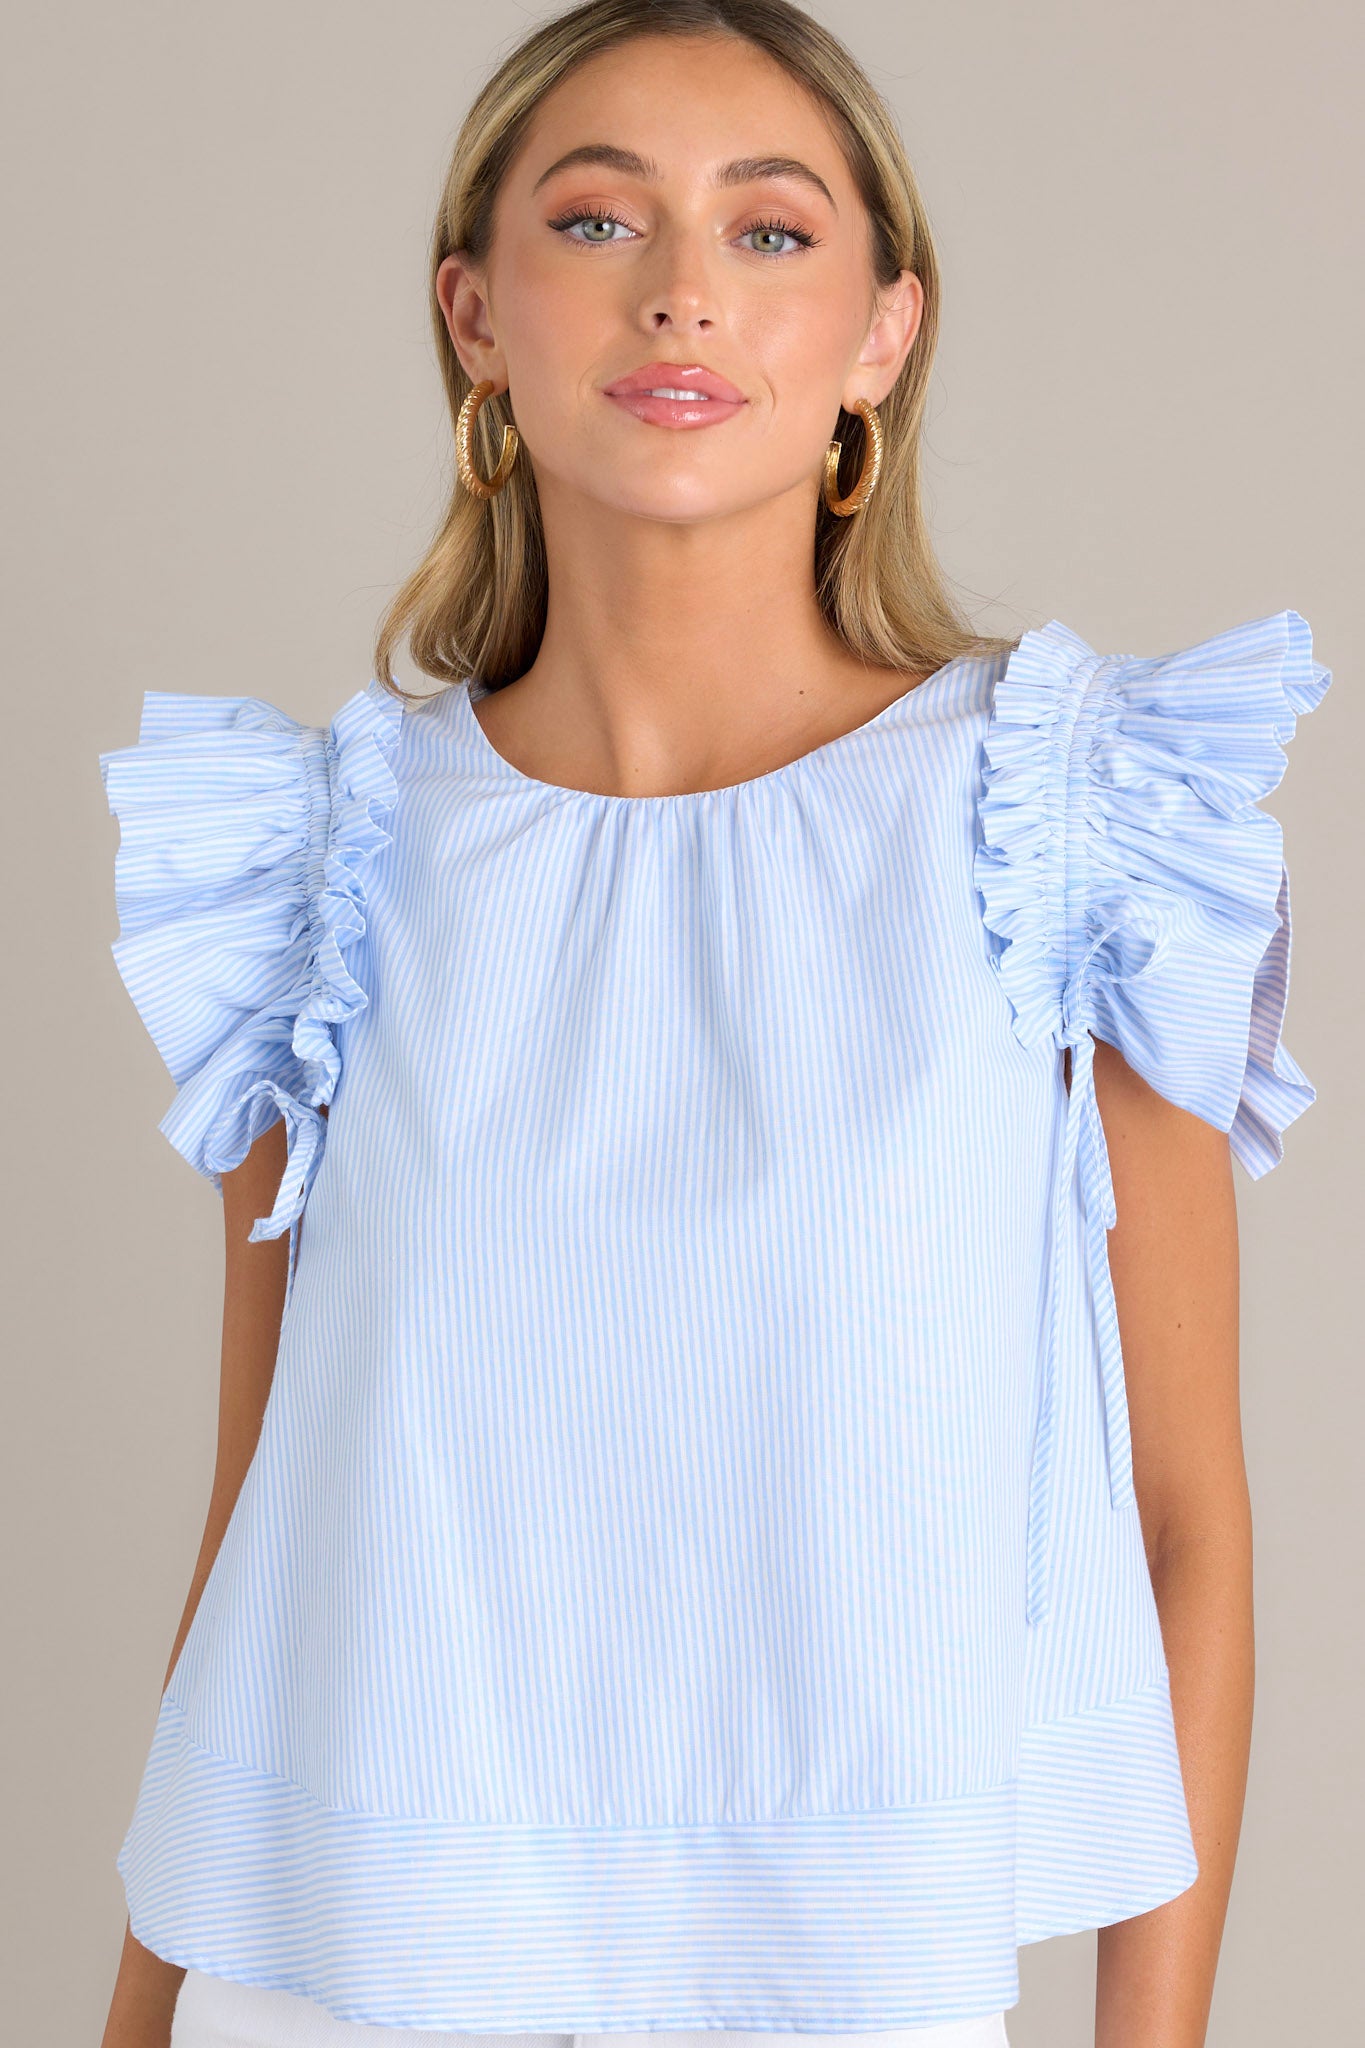 Focused view of this blue top featuring ruffle sleeves, emphasizing the adjustable bows and the vertical stripe pattern.